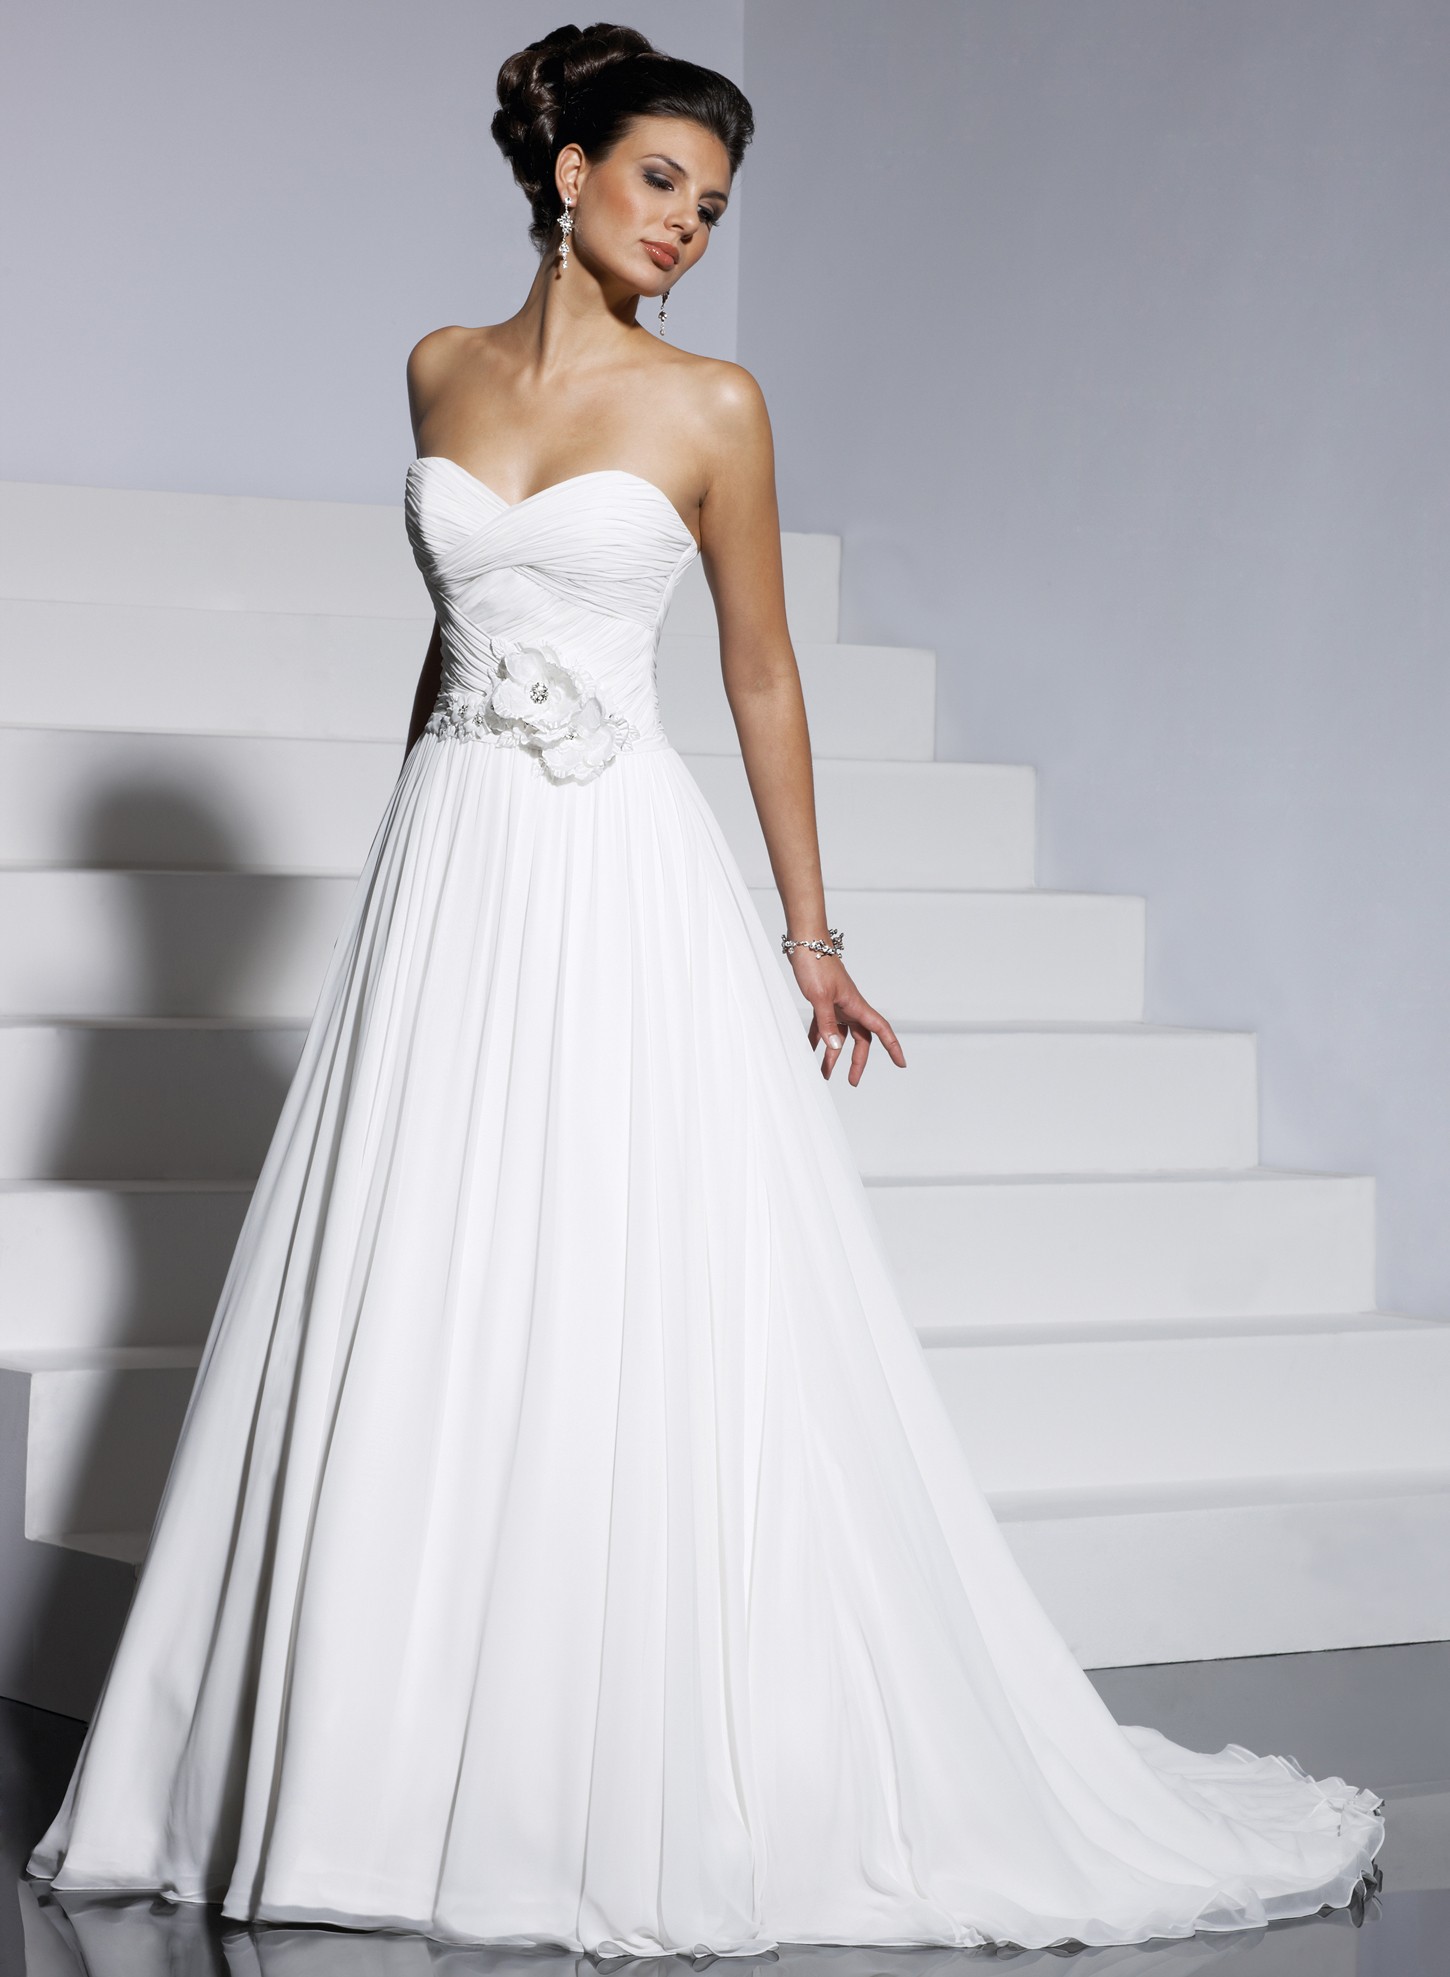 Elegant A Line Wedding Dresses Best 10 Find The Perfect Venue For Your Special Wedding Day